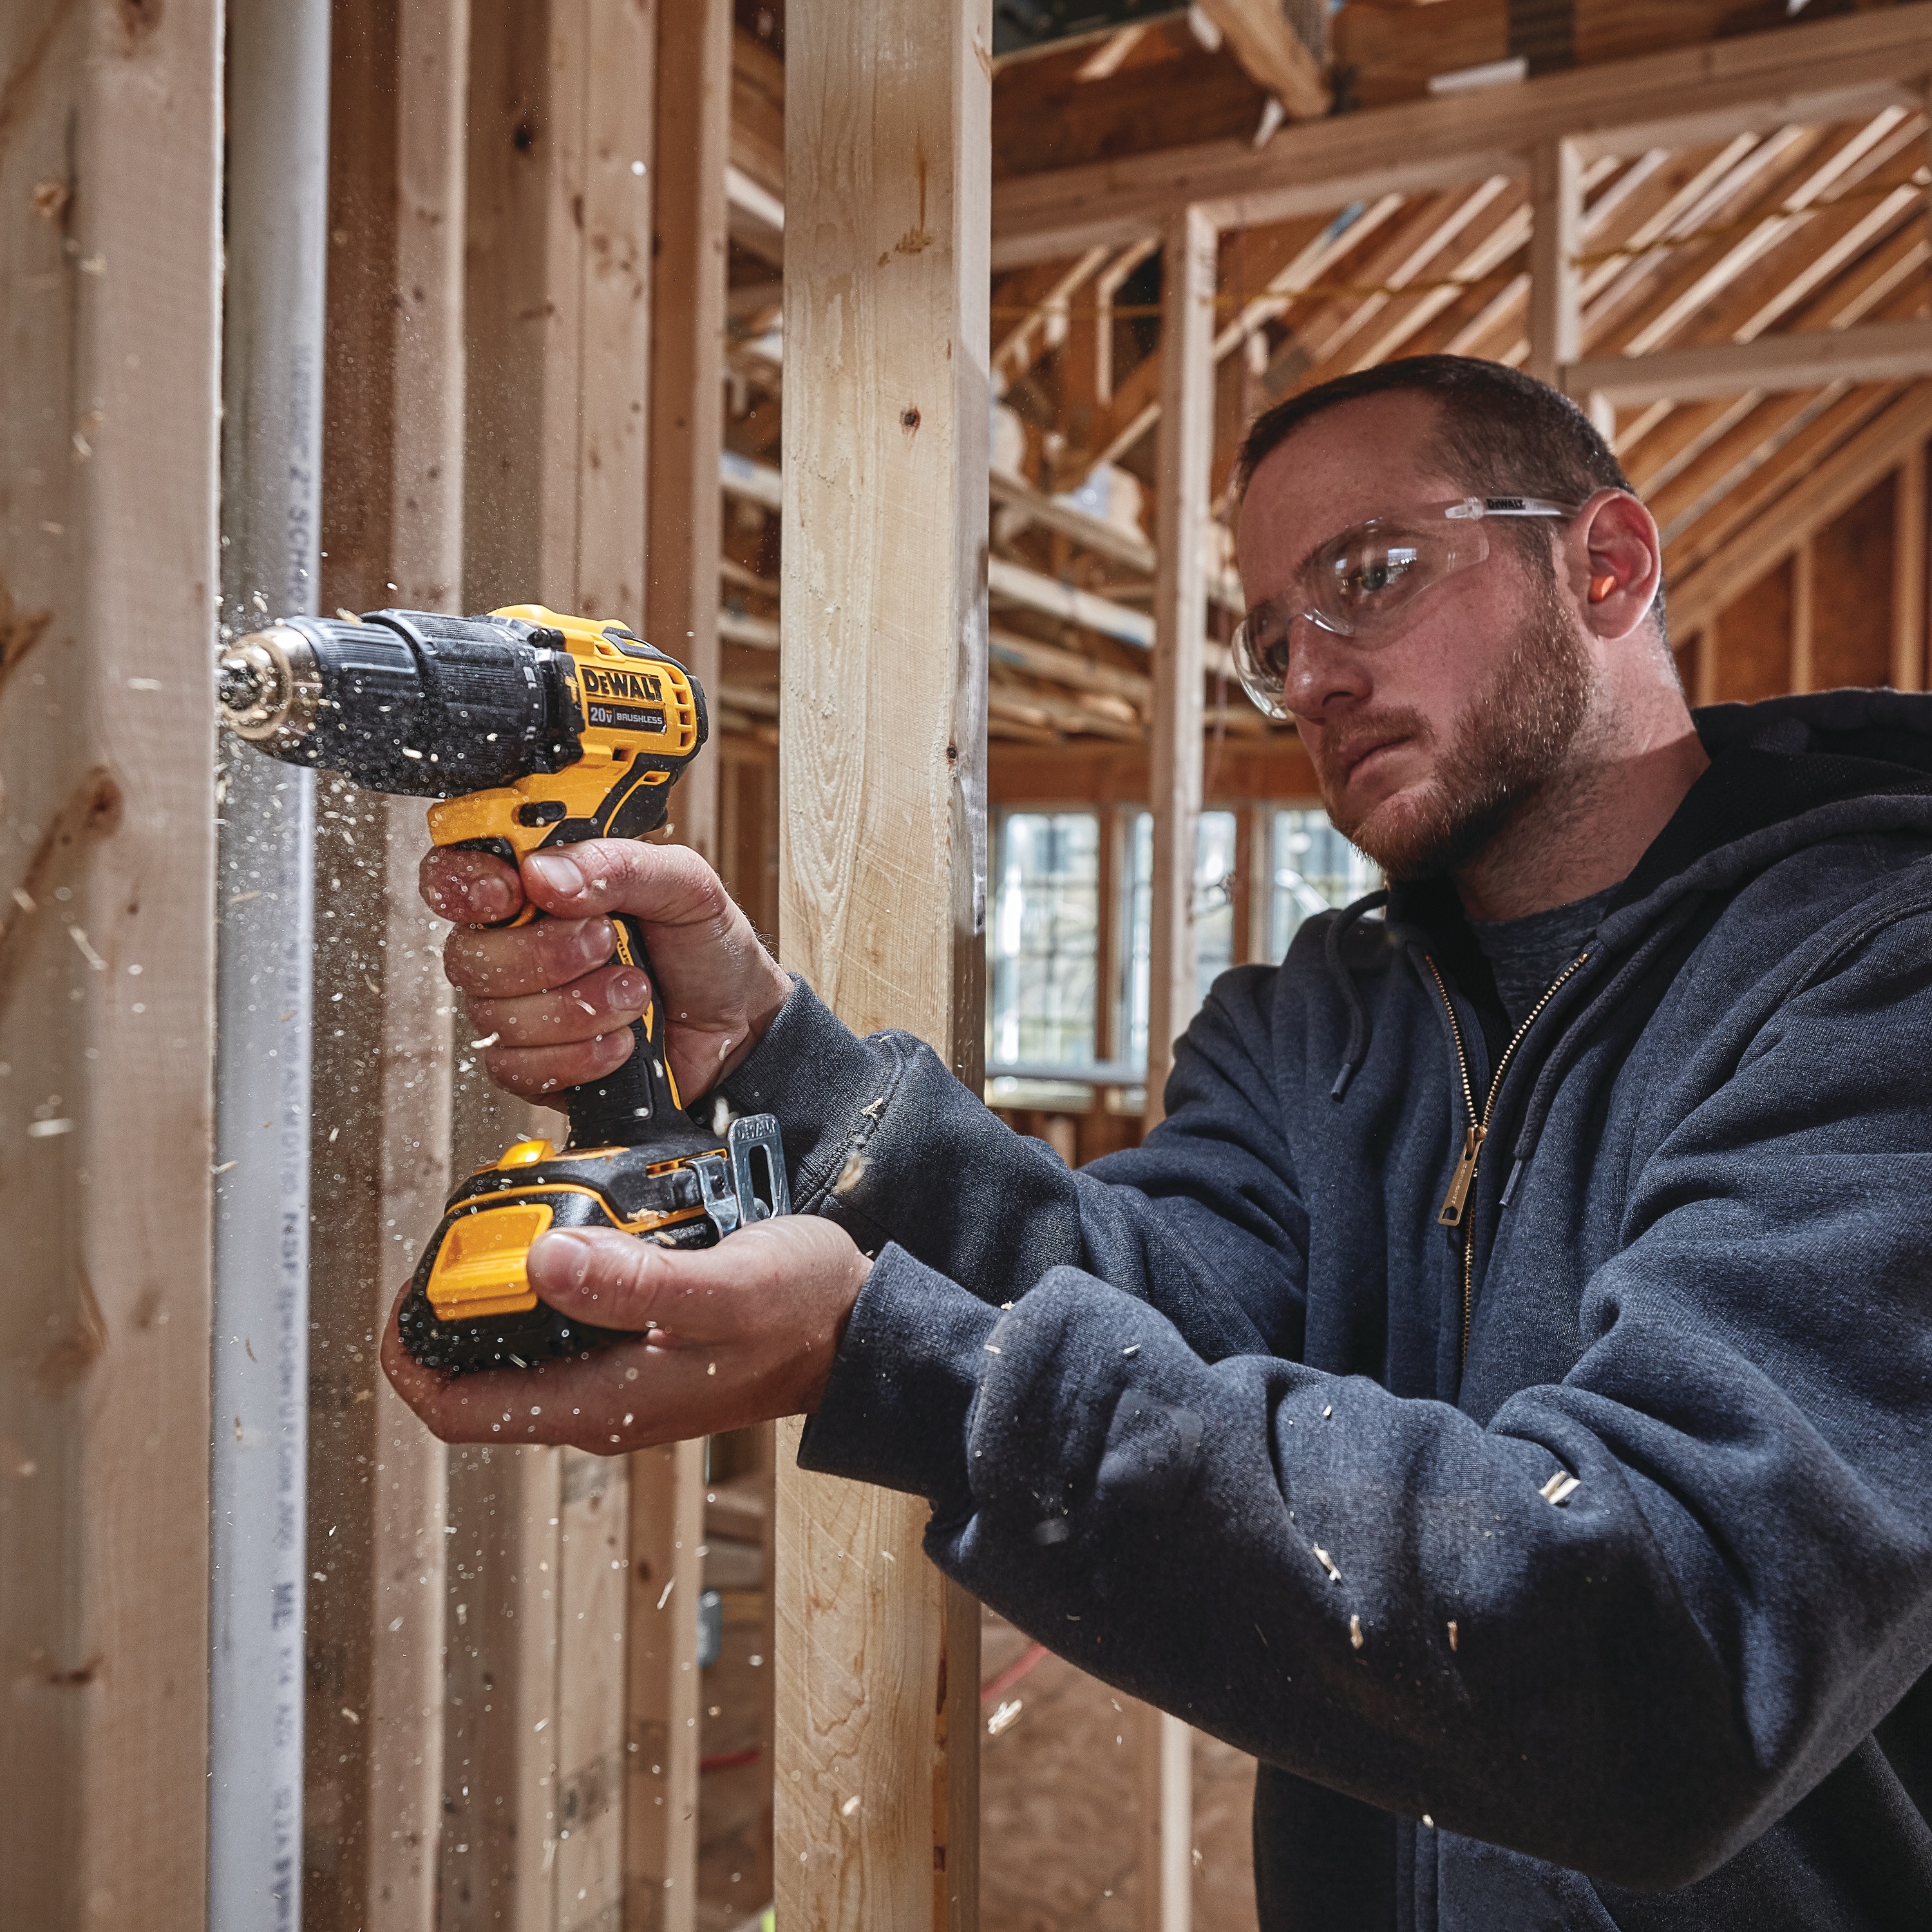 Atomic cordless compact half inch hammer drill driver is being used by a person to drill  wooden plank.